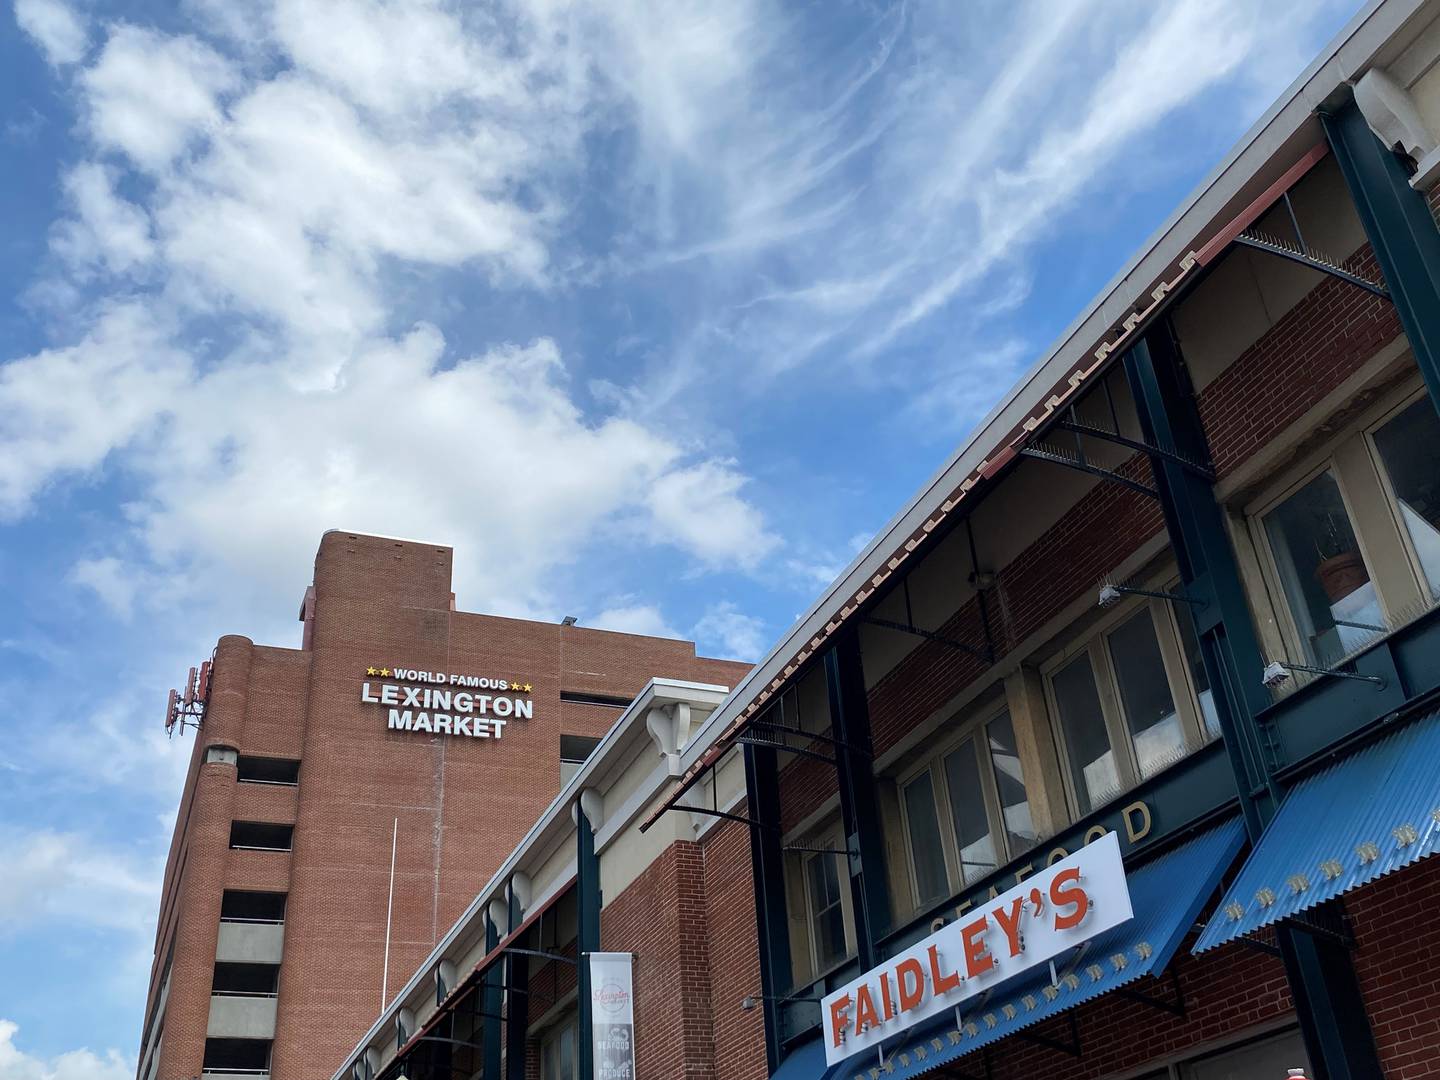 In preparation for the new Lexington Market building to open later this fall, the East Market facility is closing Saturday, Sept. 3 after 70 years in business. The new South Market building will feature a mix of current and new vendors.